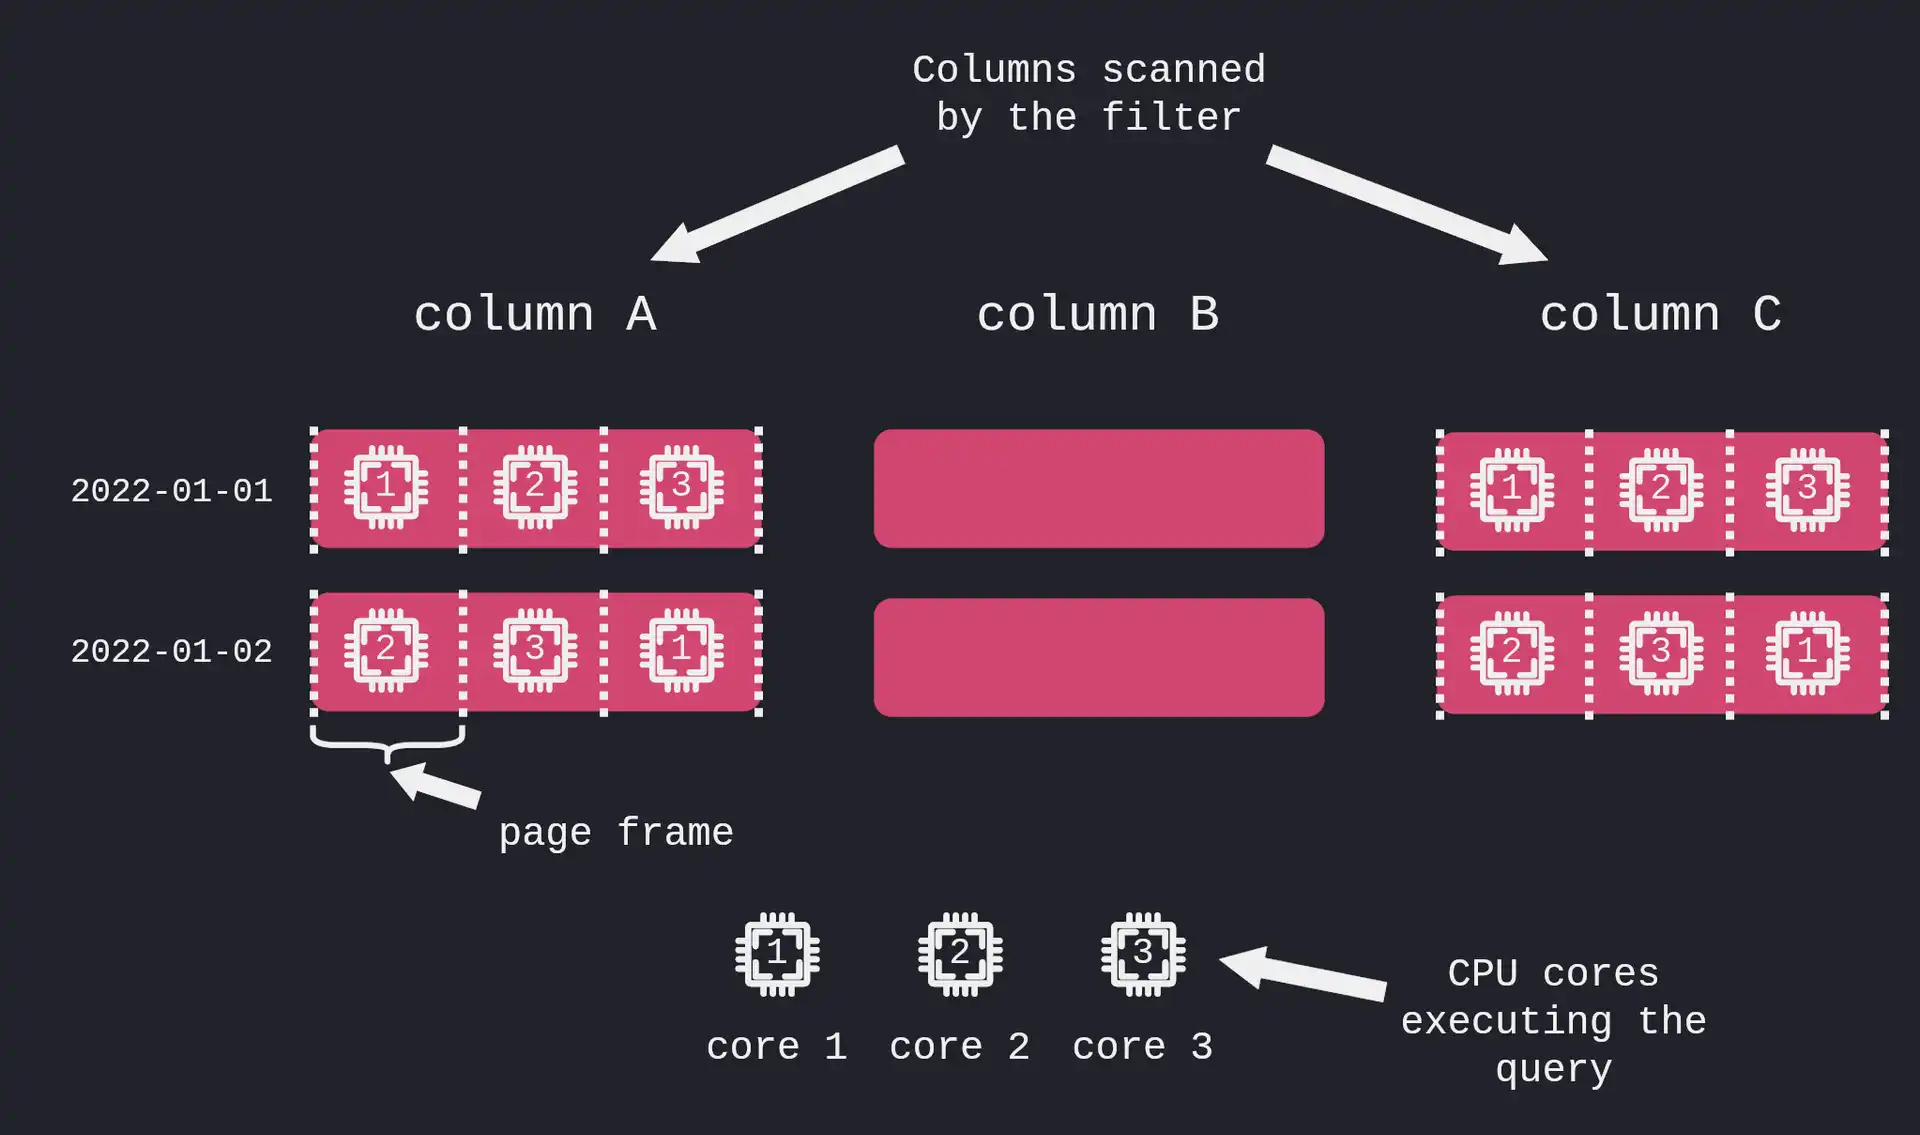 A diagram showing how parallel page frame scanning works